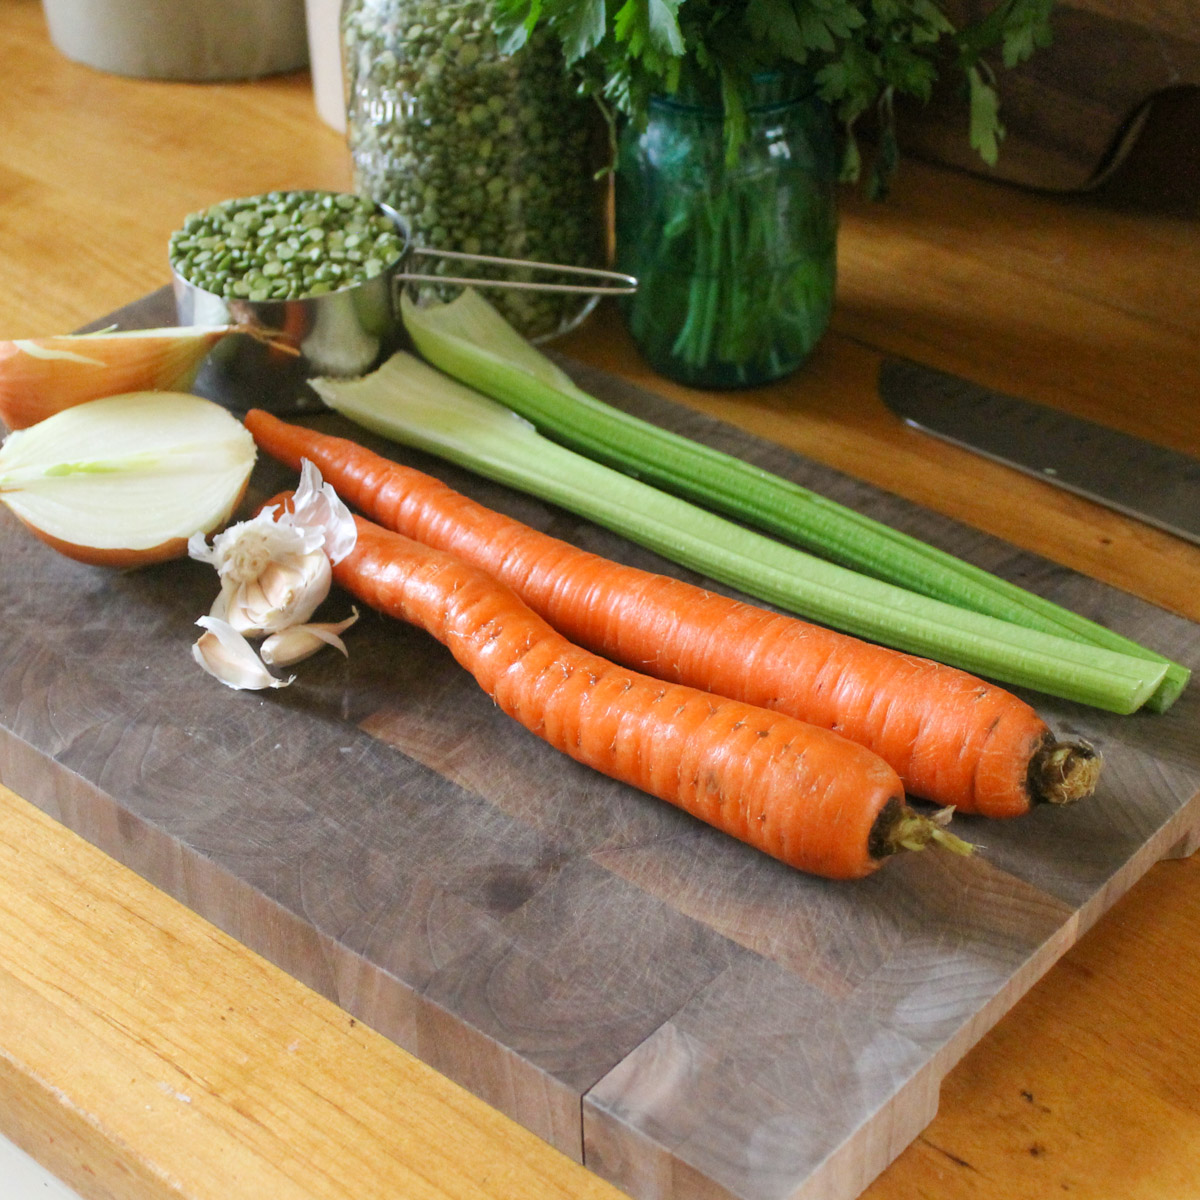 Split pea soup ingredients on a cutting board including raw carrots, celery, onion, garlic, and a jar with a measuring cup of dry split peas.